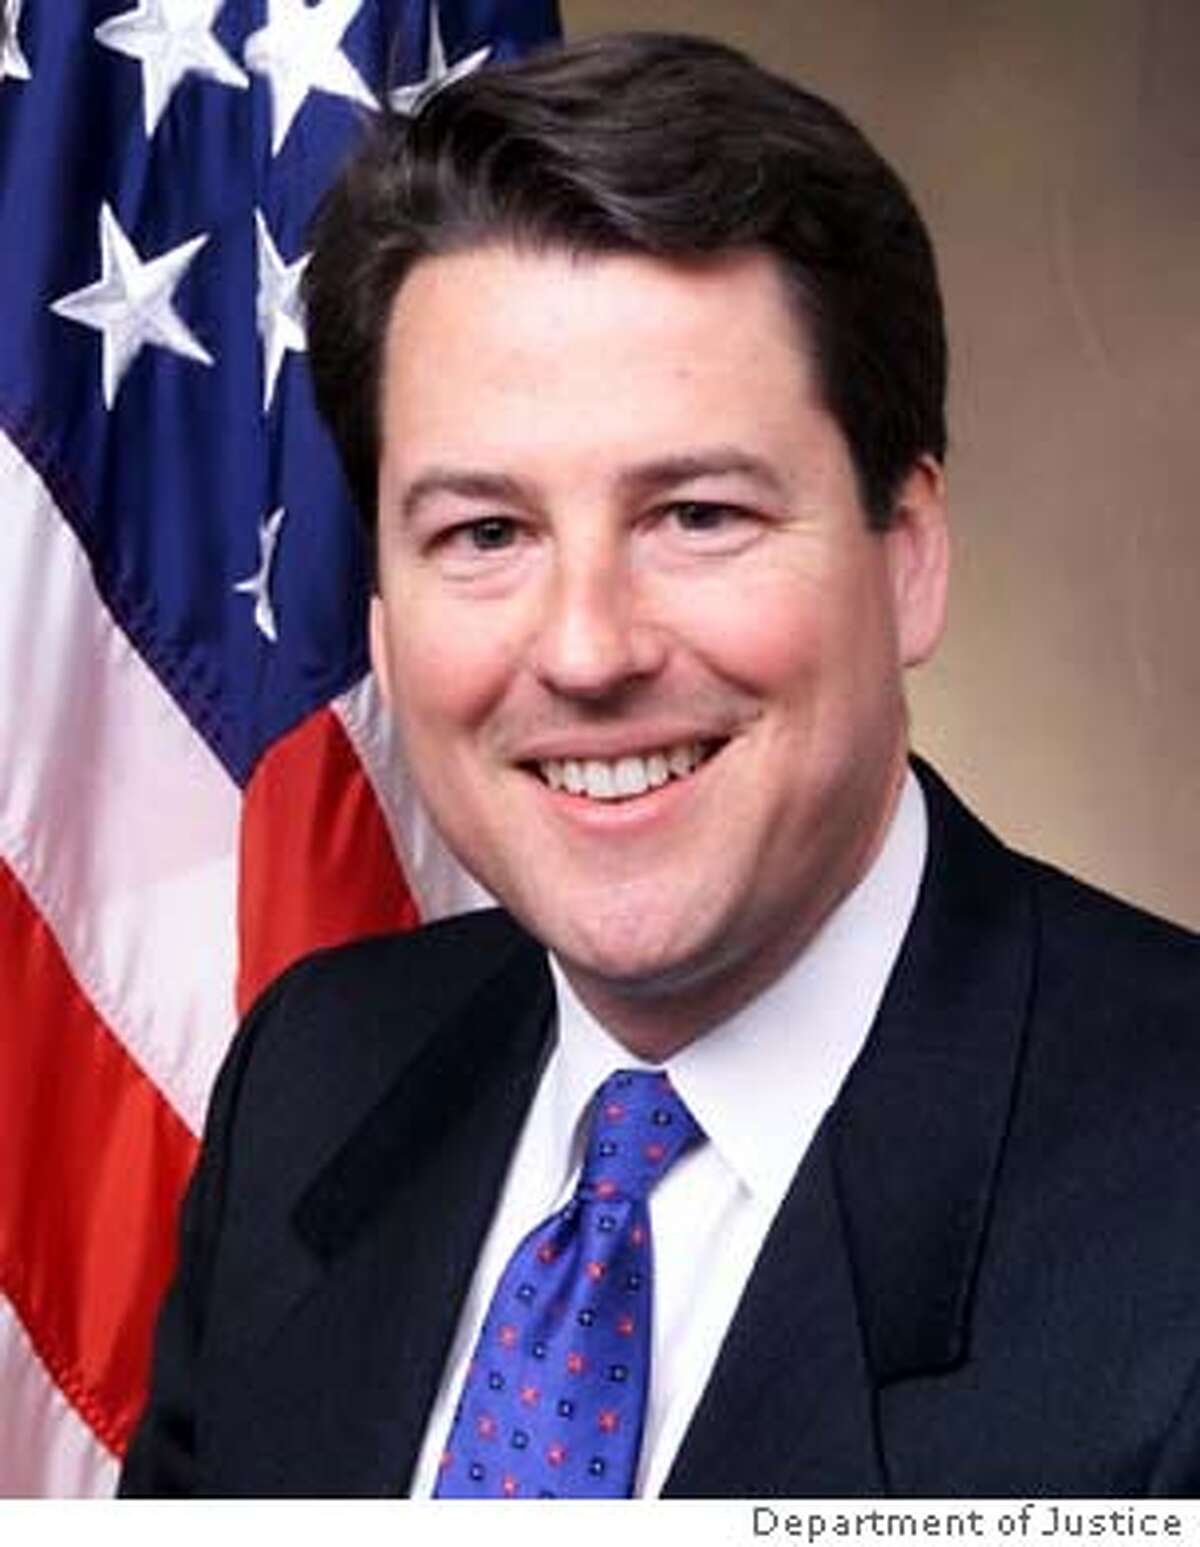 R. Hewitt Pate, Assistant Attorney General for Antitrust. He was appointed to this position on June 16, 2003. HANDOUT from DOJ website. OK to use.